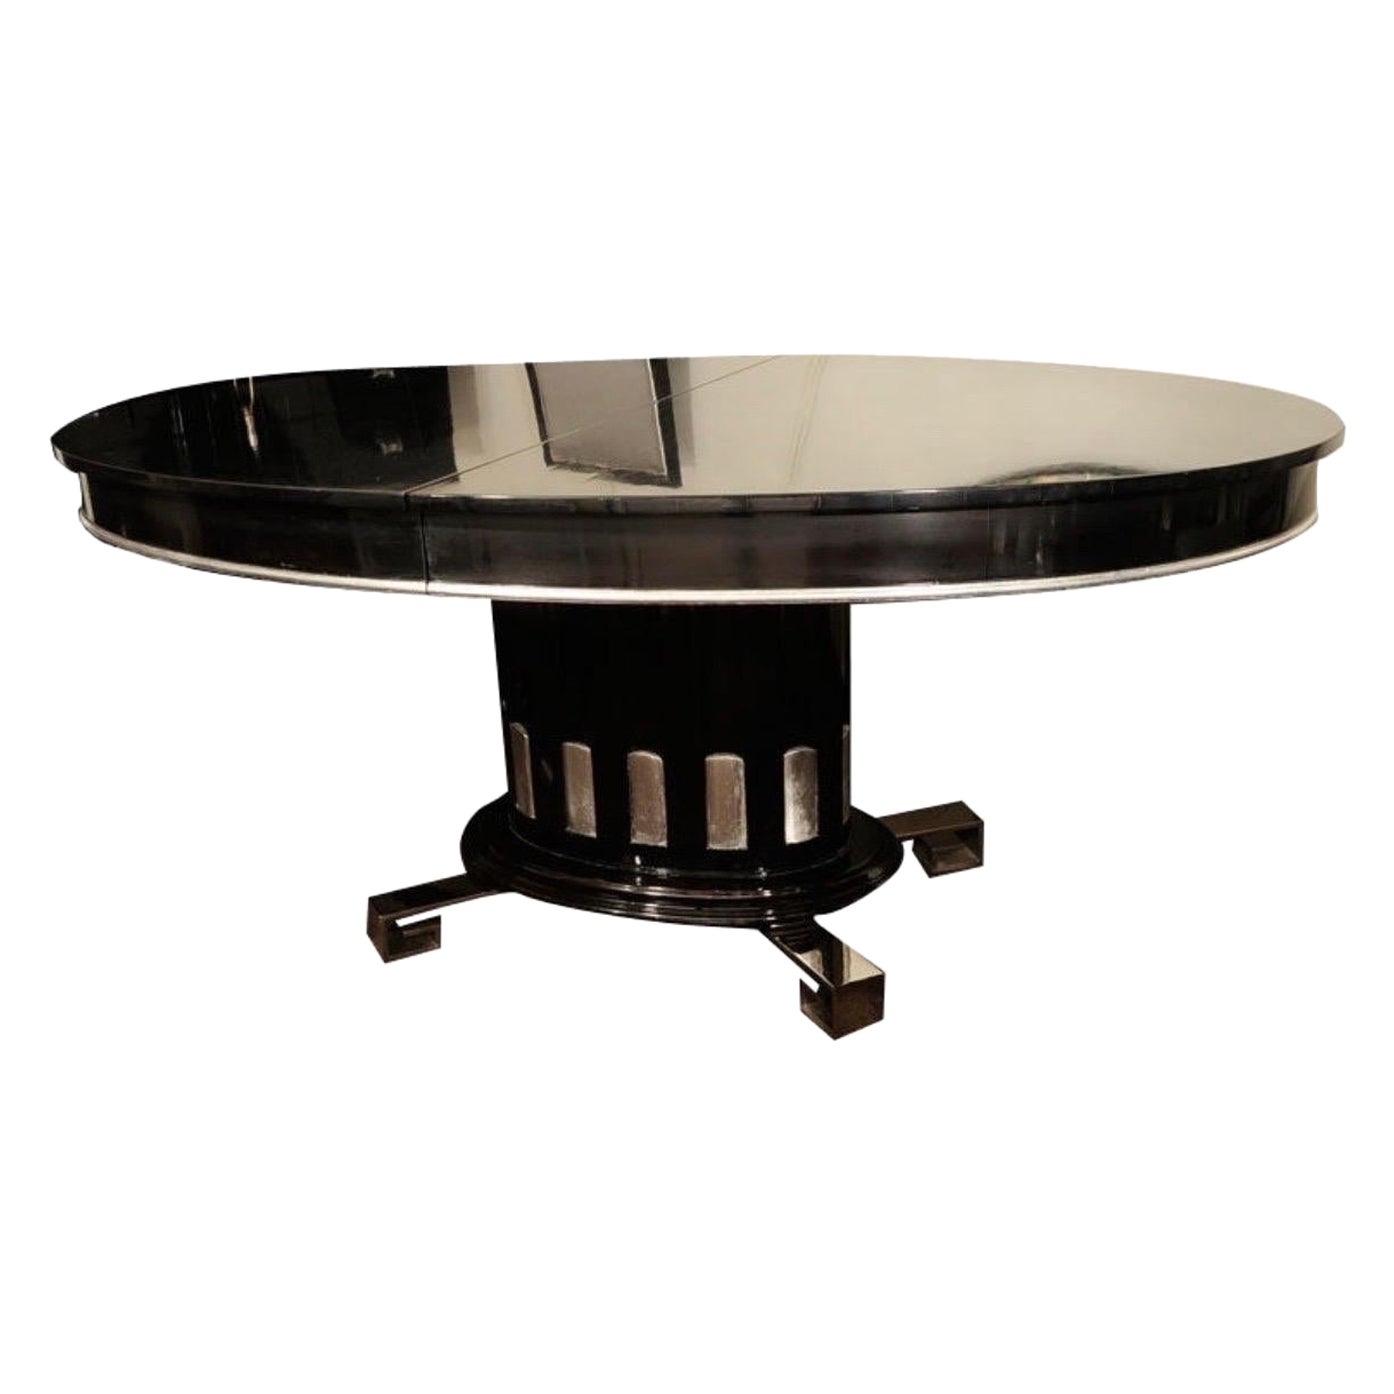 Art Deco Revival Ebonized Dining Table by Renzo Rutili for Johnson Furniture For Sale